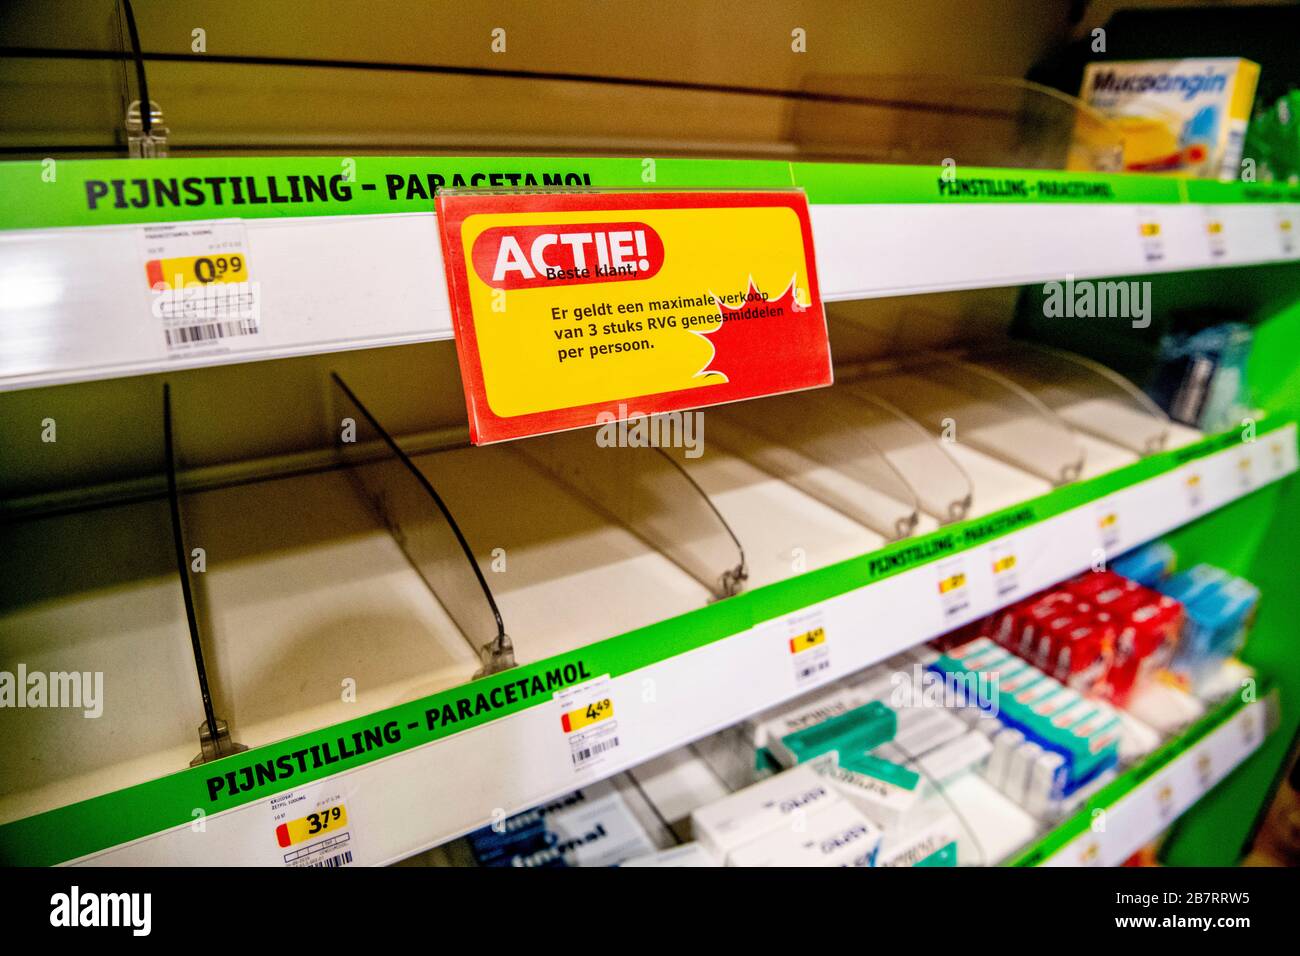 A view of empty shelves of medicine in a pharmacy store as the coronavirus  continues to spread in Europe.Several European countries have closed  borders, schools as well as public facilities, and have